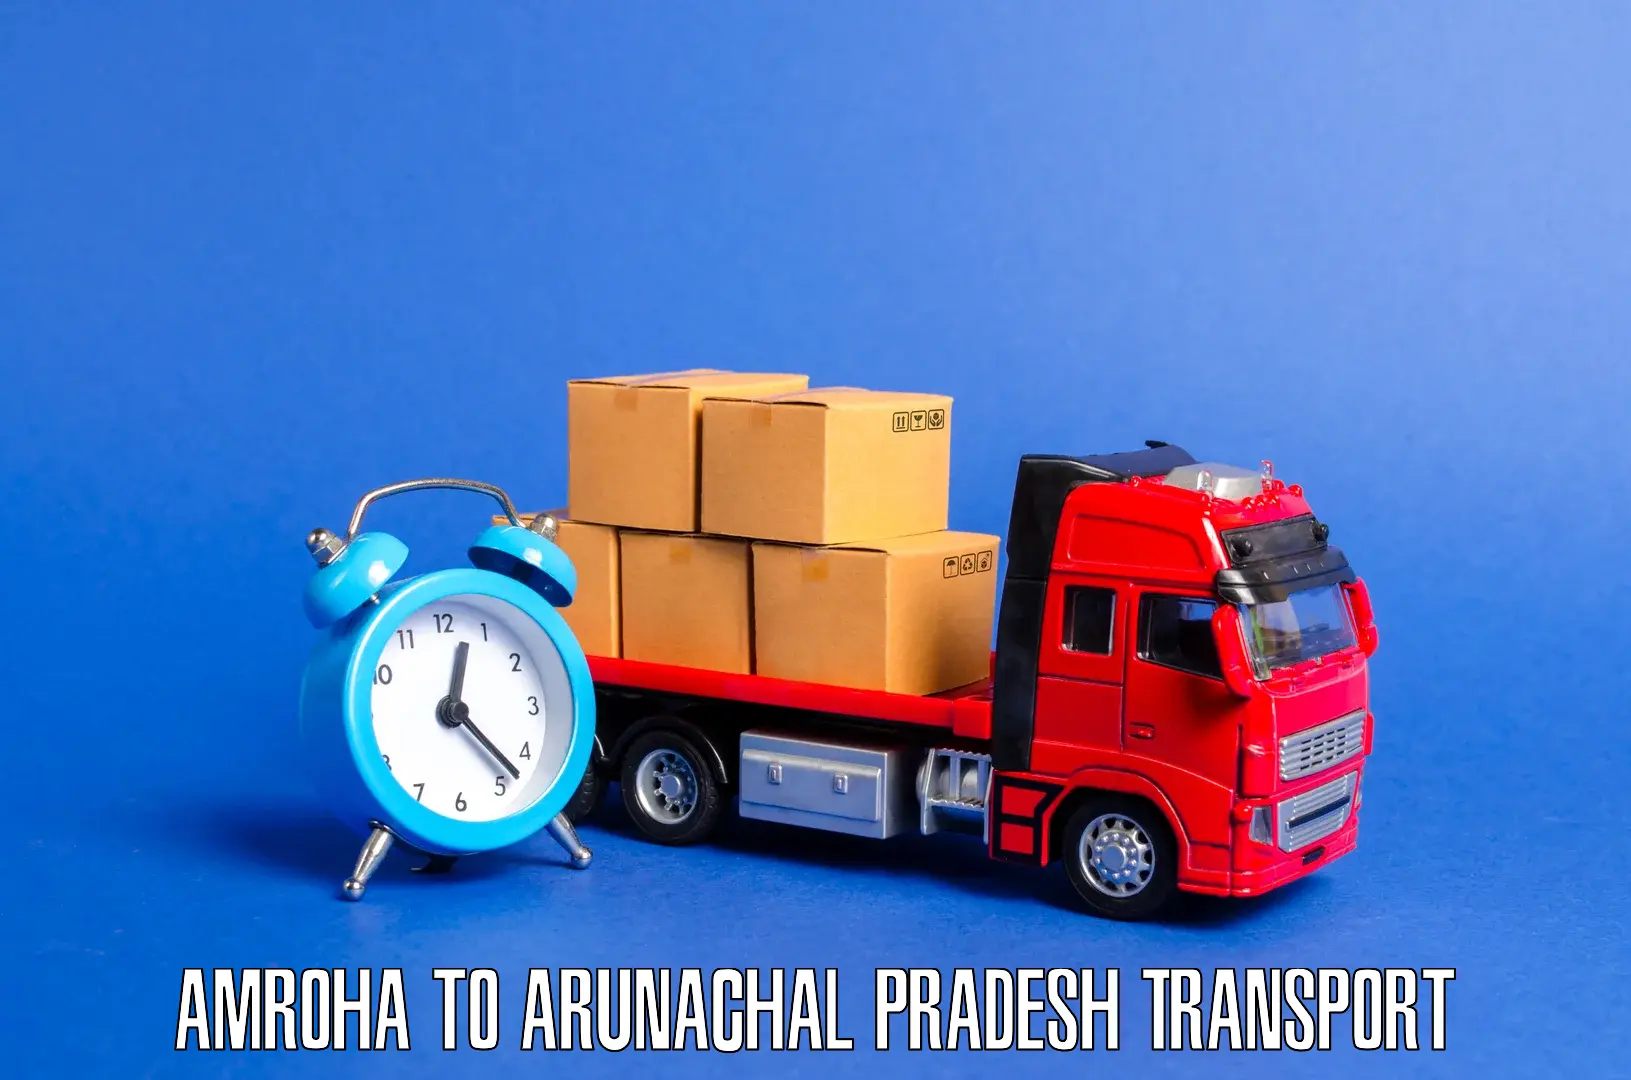 Delivery service Amroha to Aalo